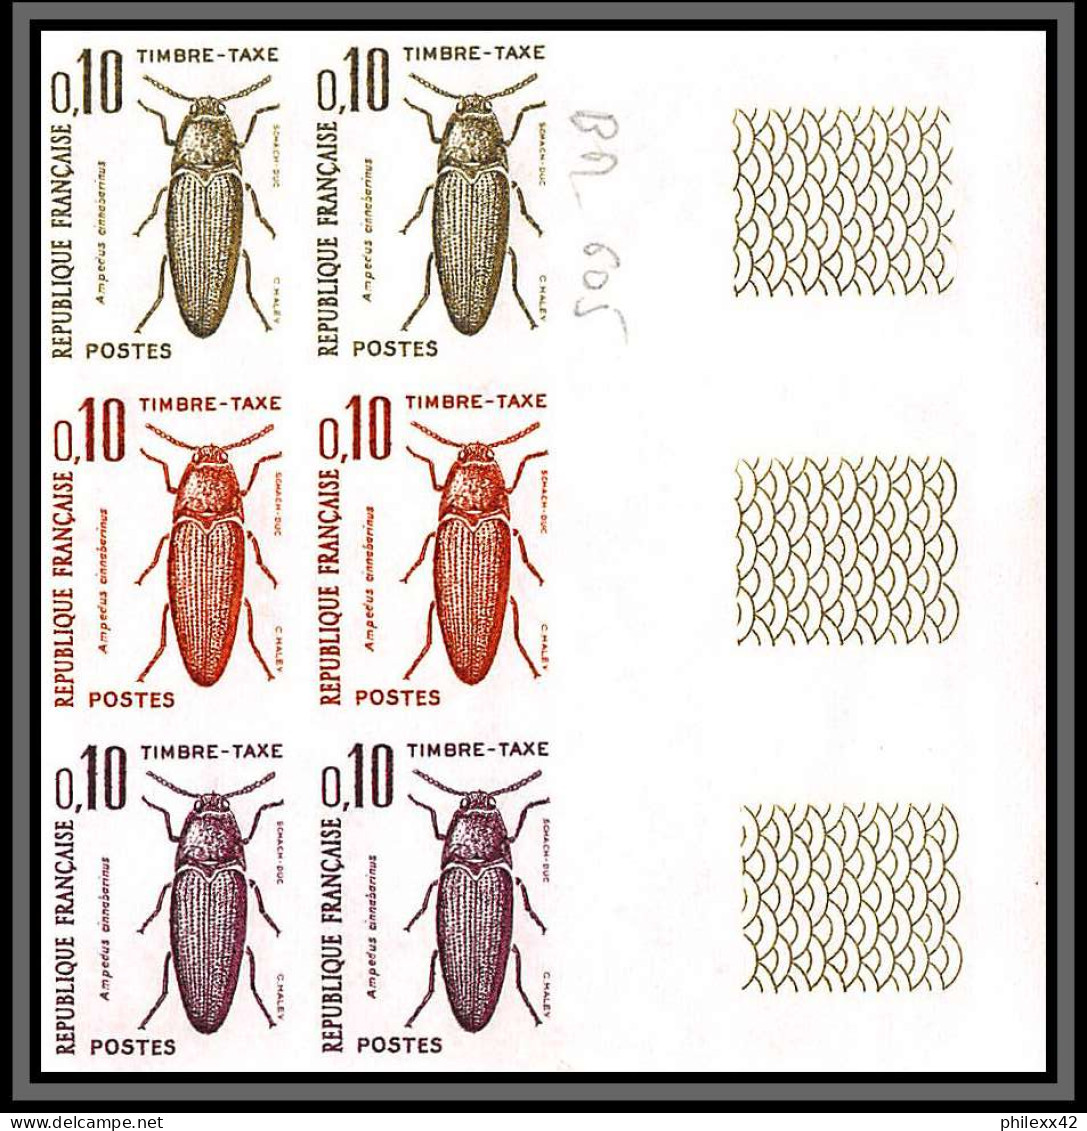 France Taxe N°103/108 insectes coleopteres beetle insects Essai trial proof Non dentelé ** imperf Bloc 6 coin de feuille